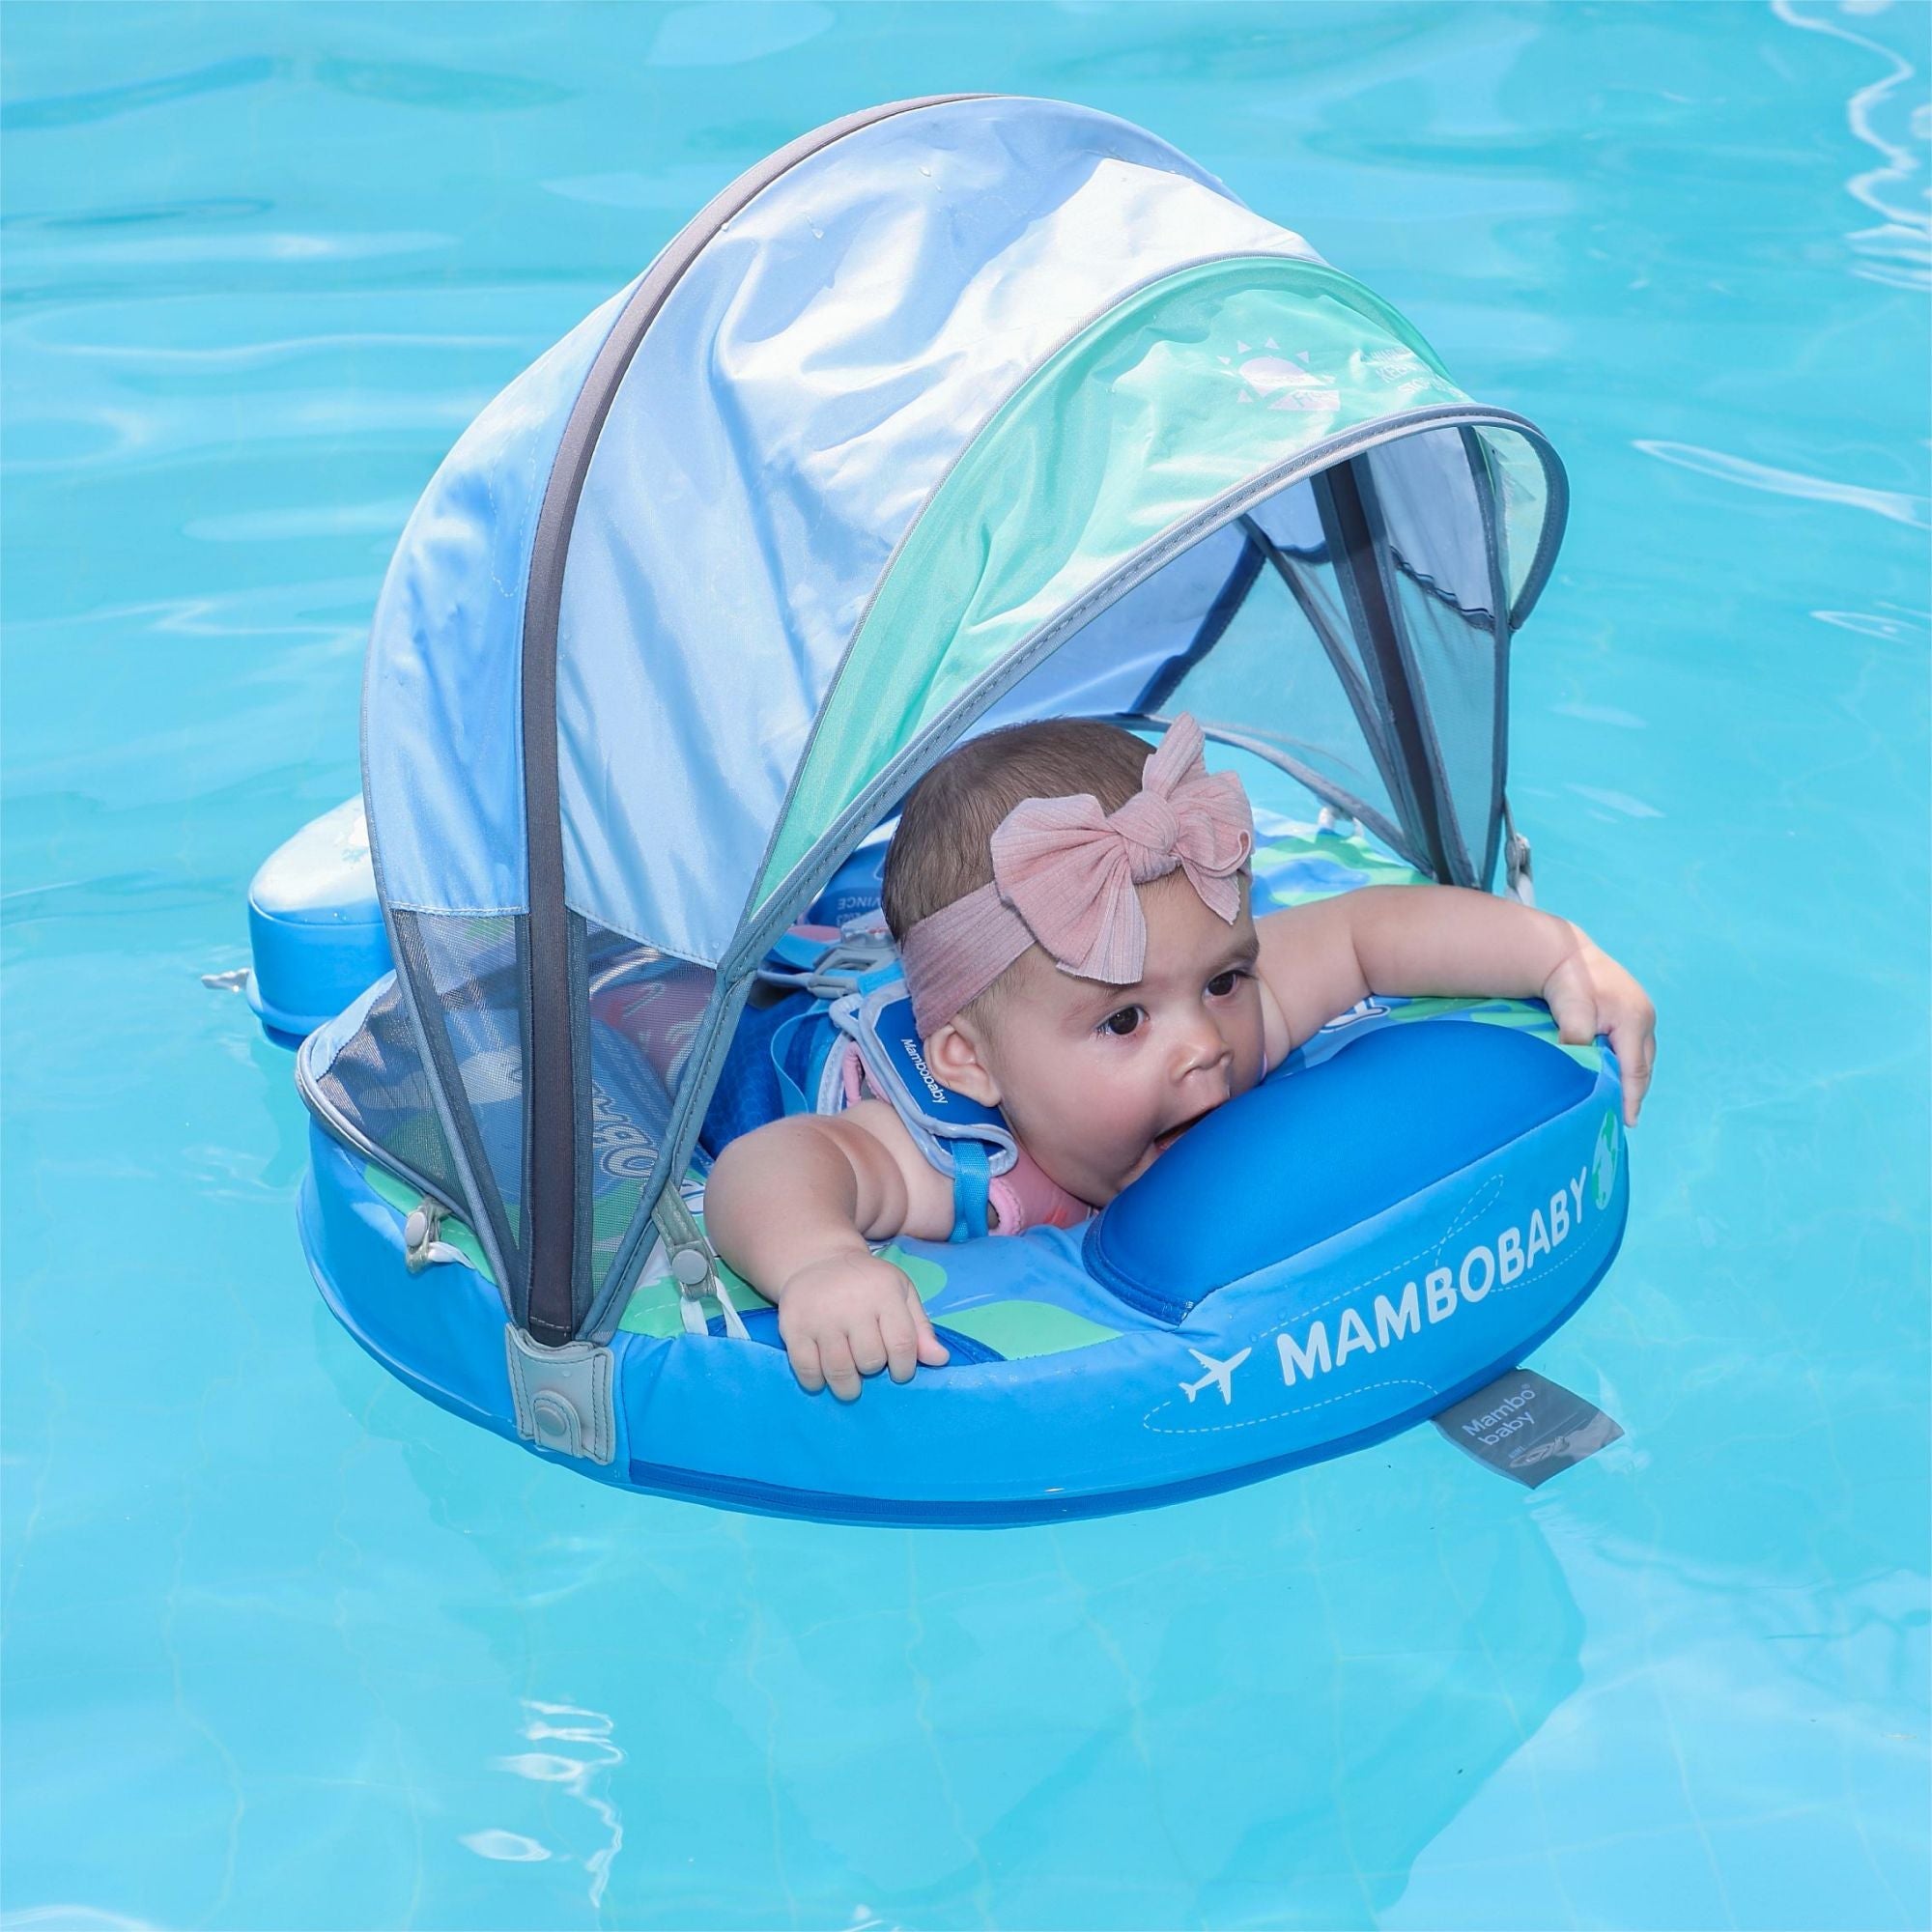 Mambobaby Earth Swim Float with Canopy